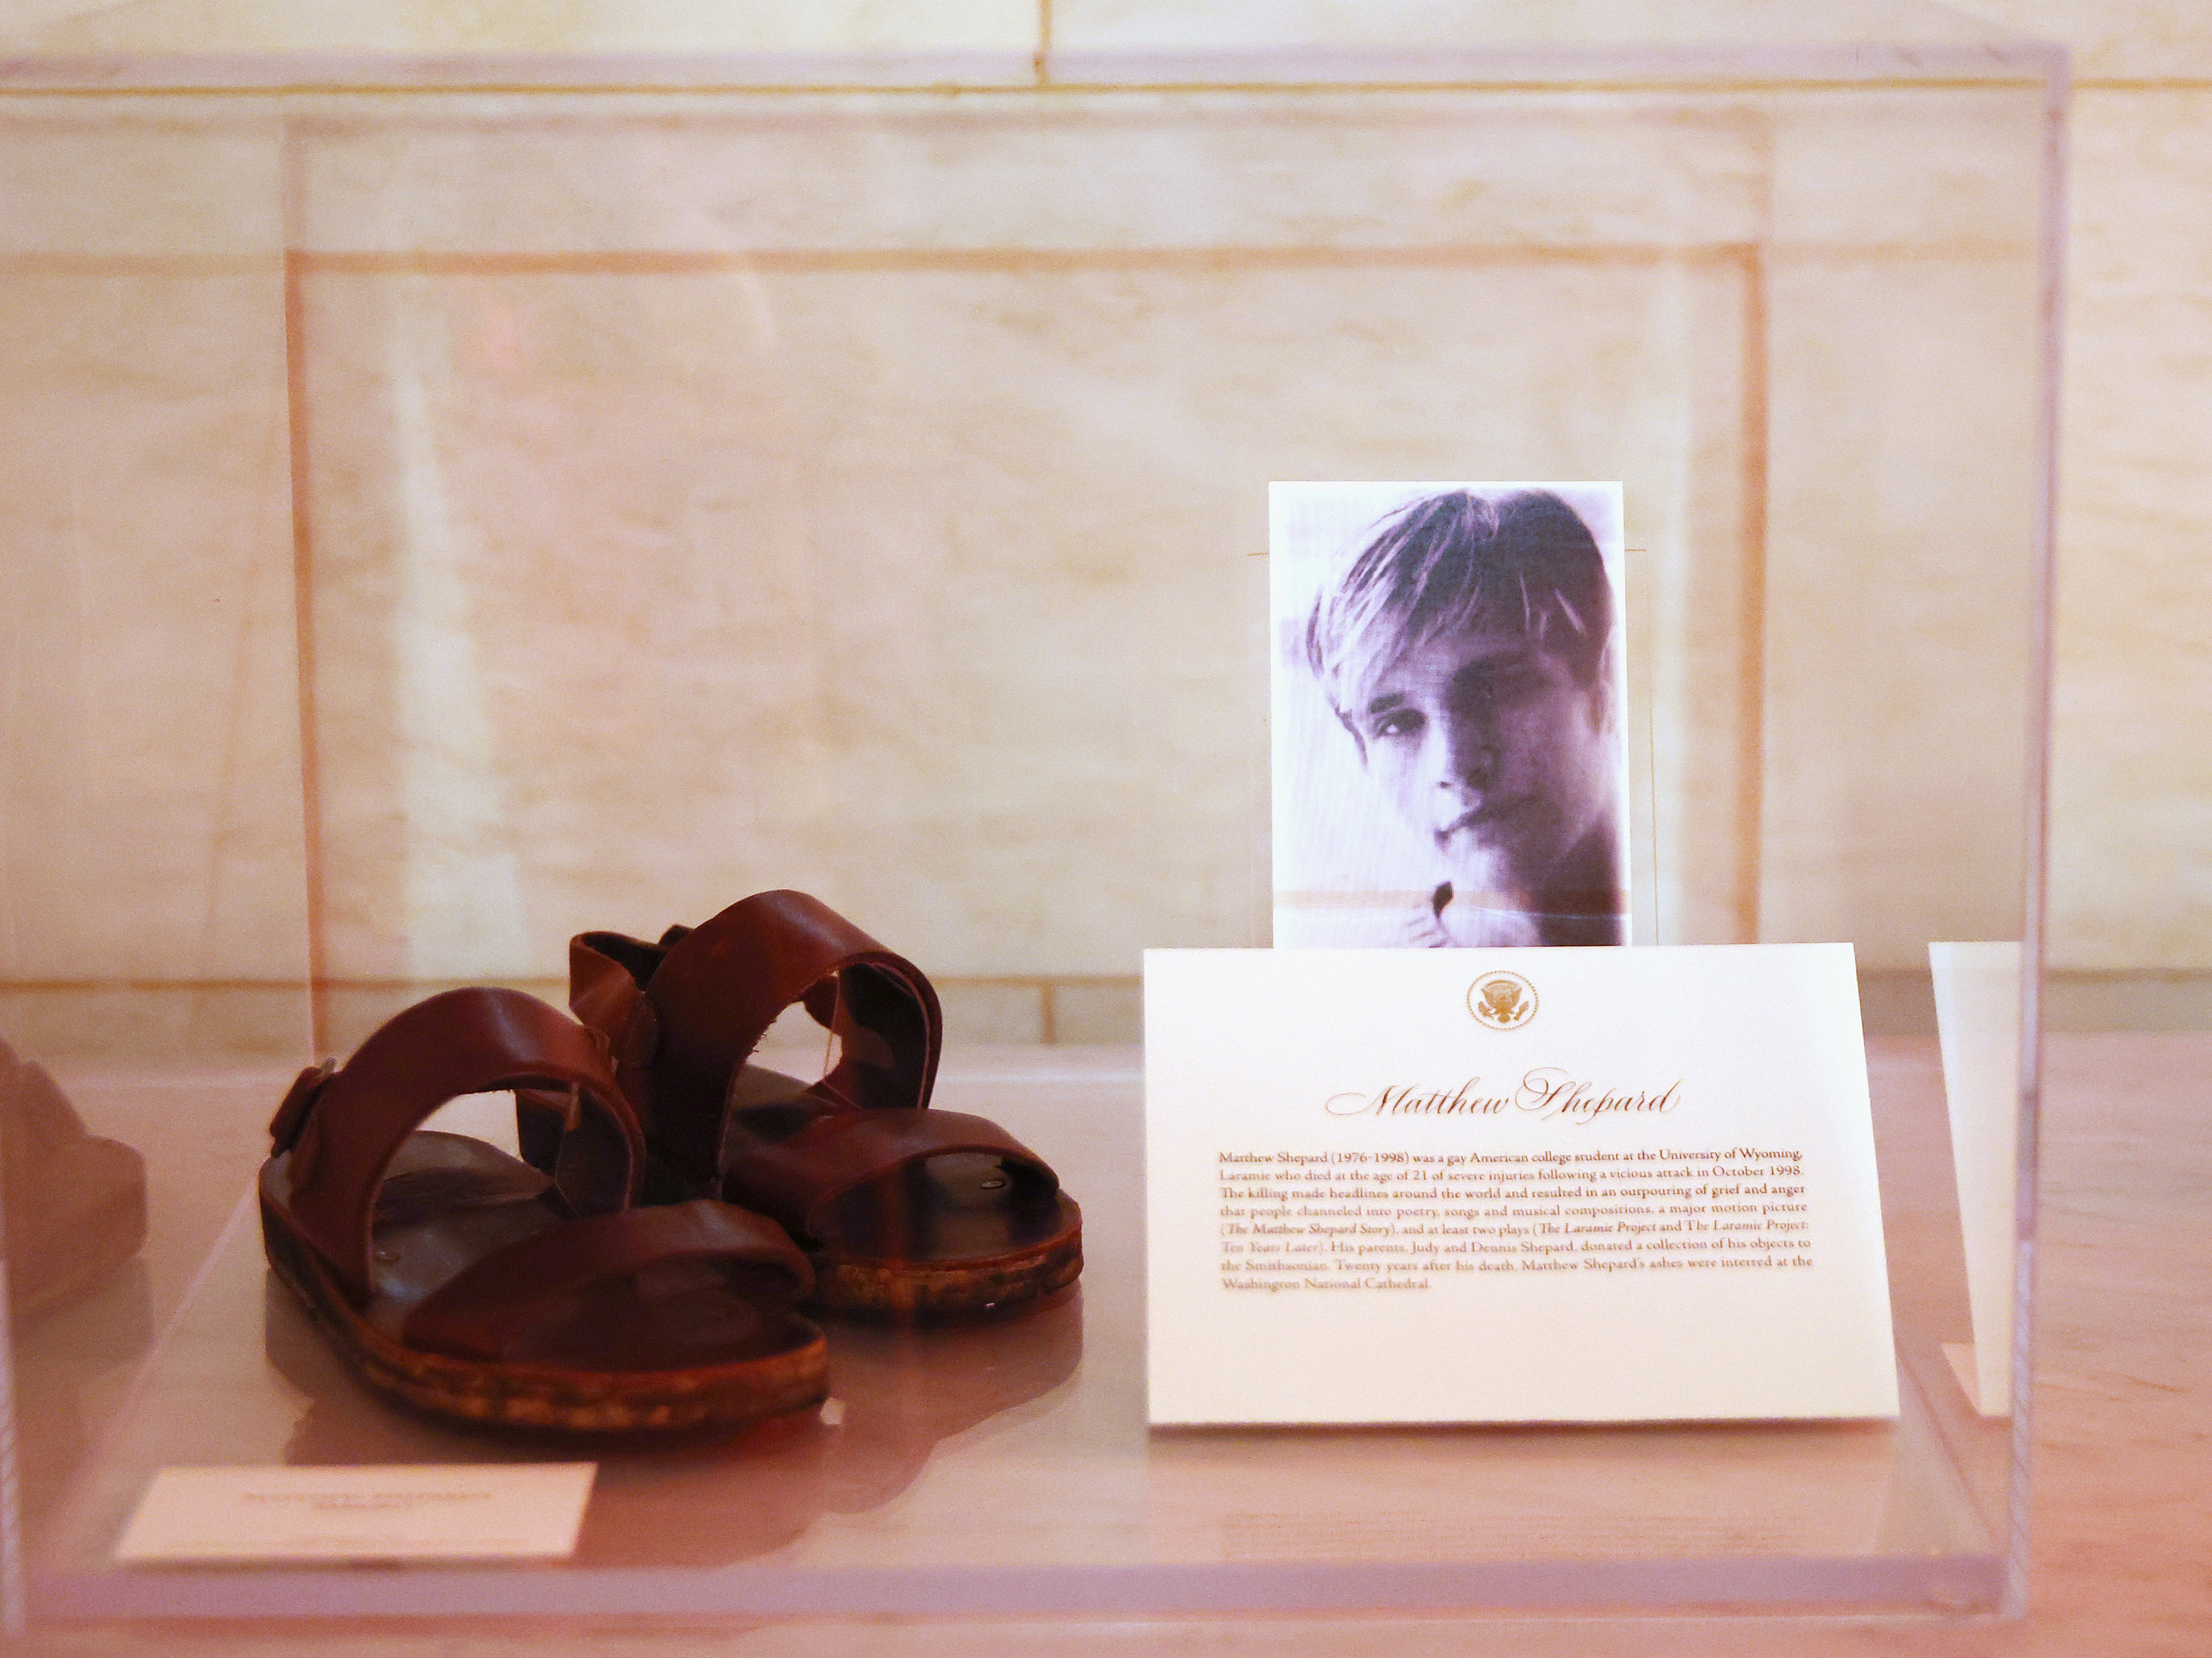 A pair of Matthew Shepard’s sandals are displayed at the White House as part of the commemoration of LGBTQ+ Pride Month on June 25, 2021 in Washington